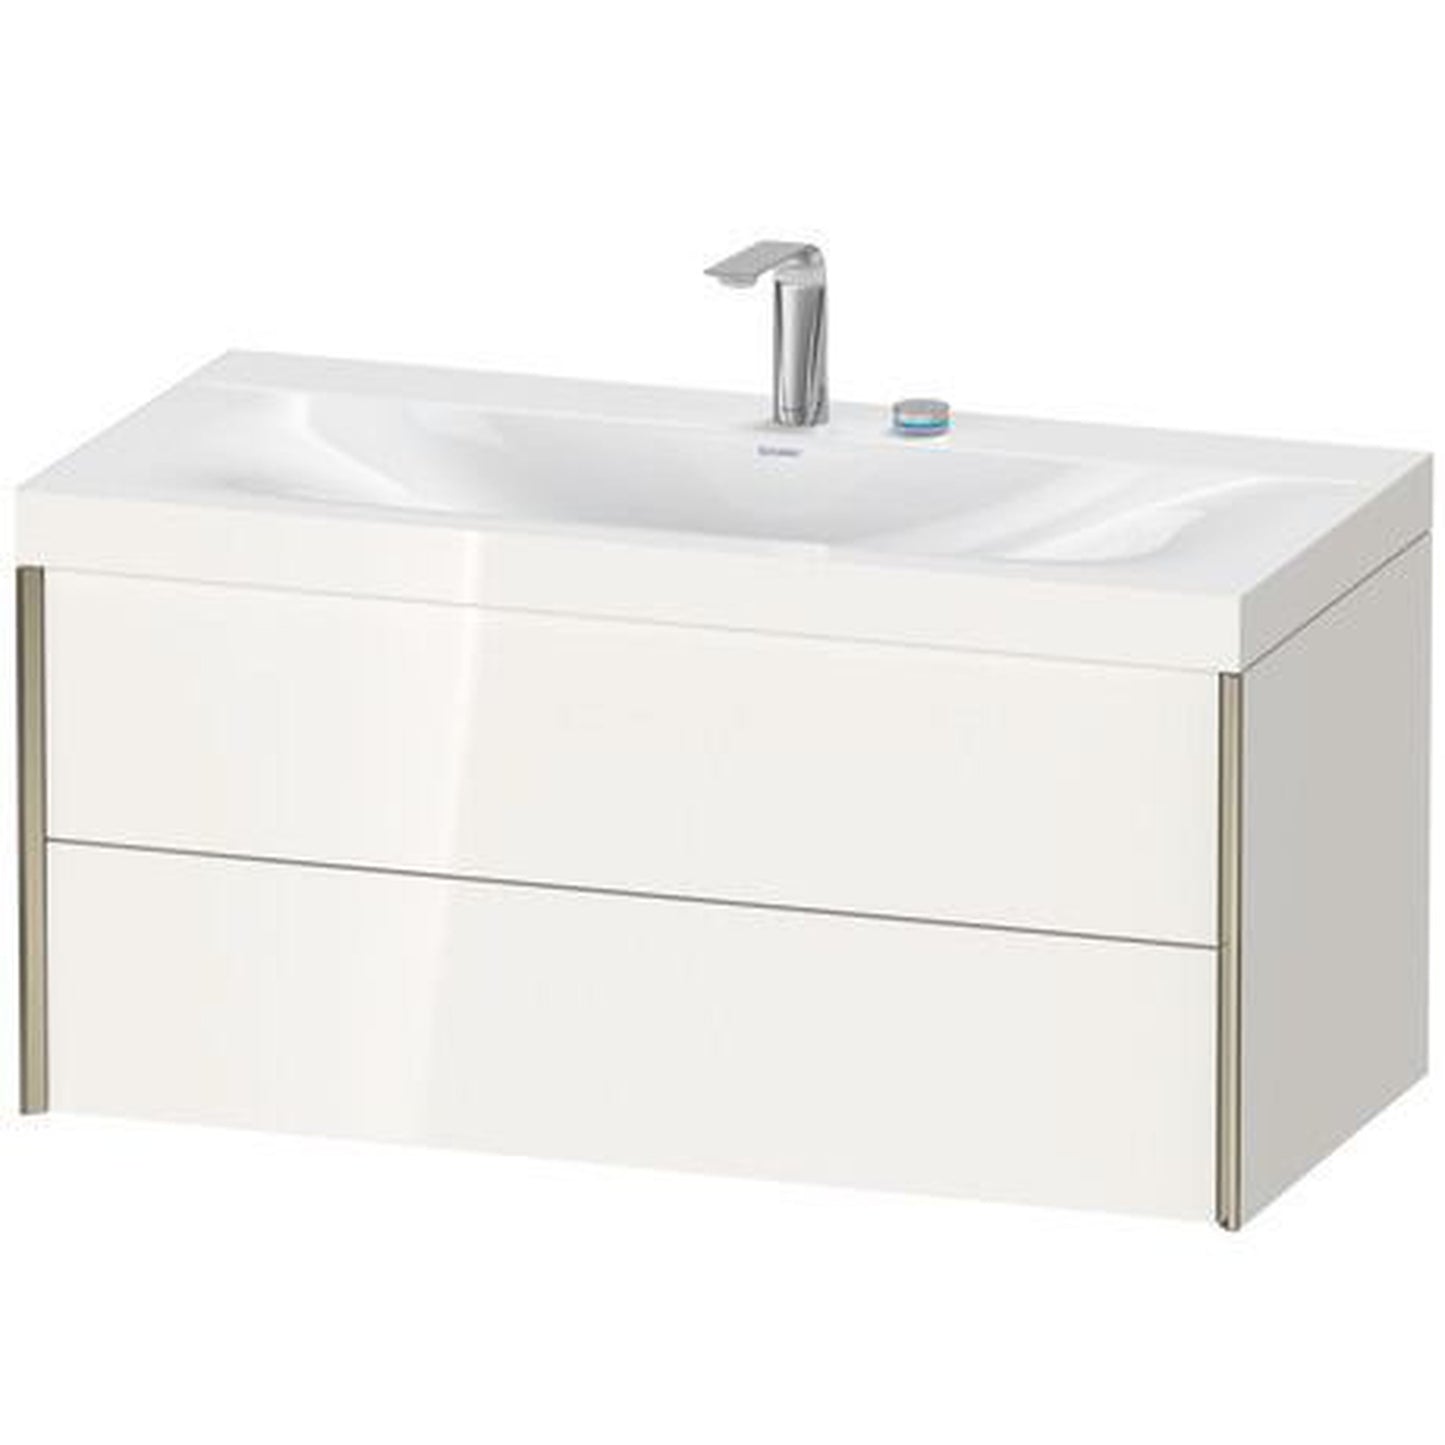 Duravit Xviu 39" x 20" x 19" Two Drawer C-Bonded Wall-Mount Vanity Kit With Two Tap Holes, White (XV4616EB122C)